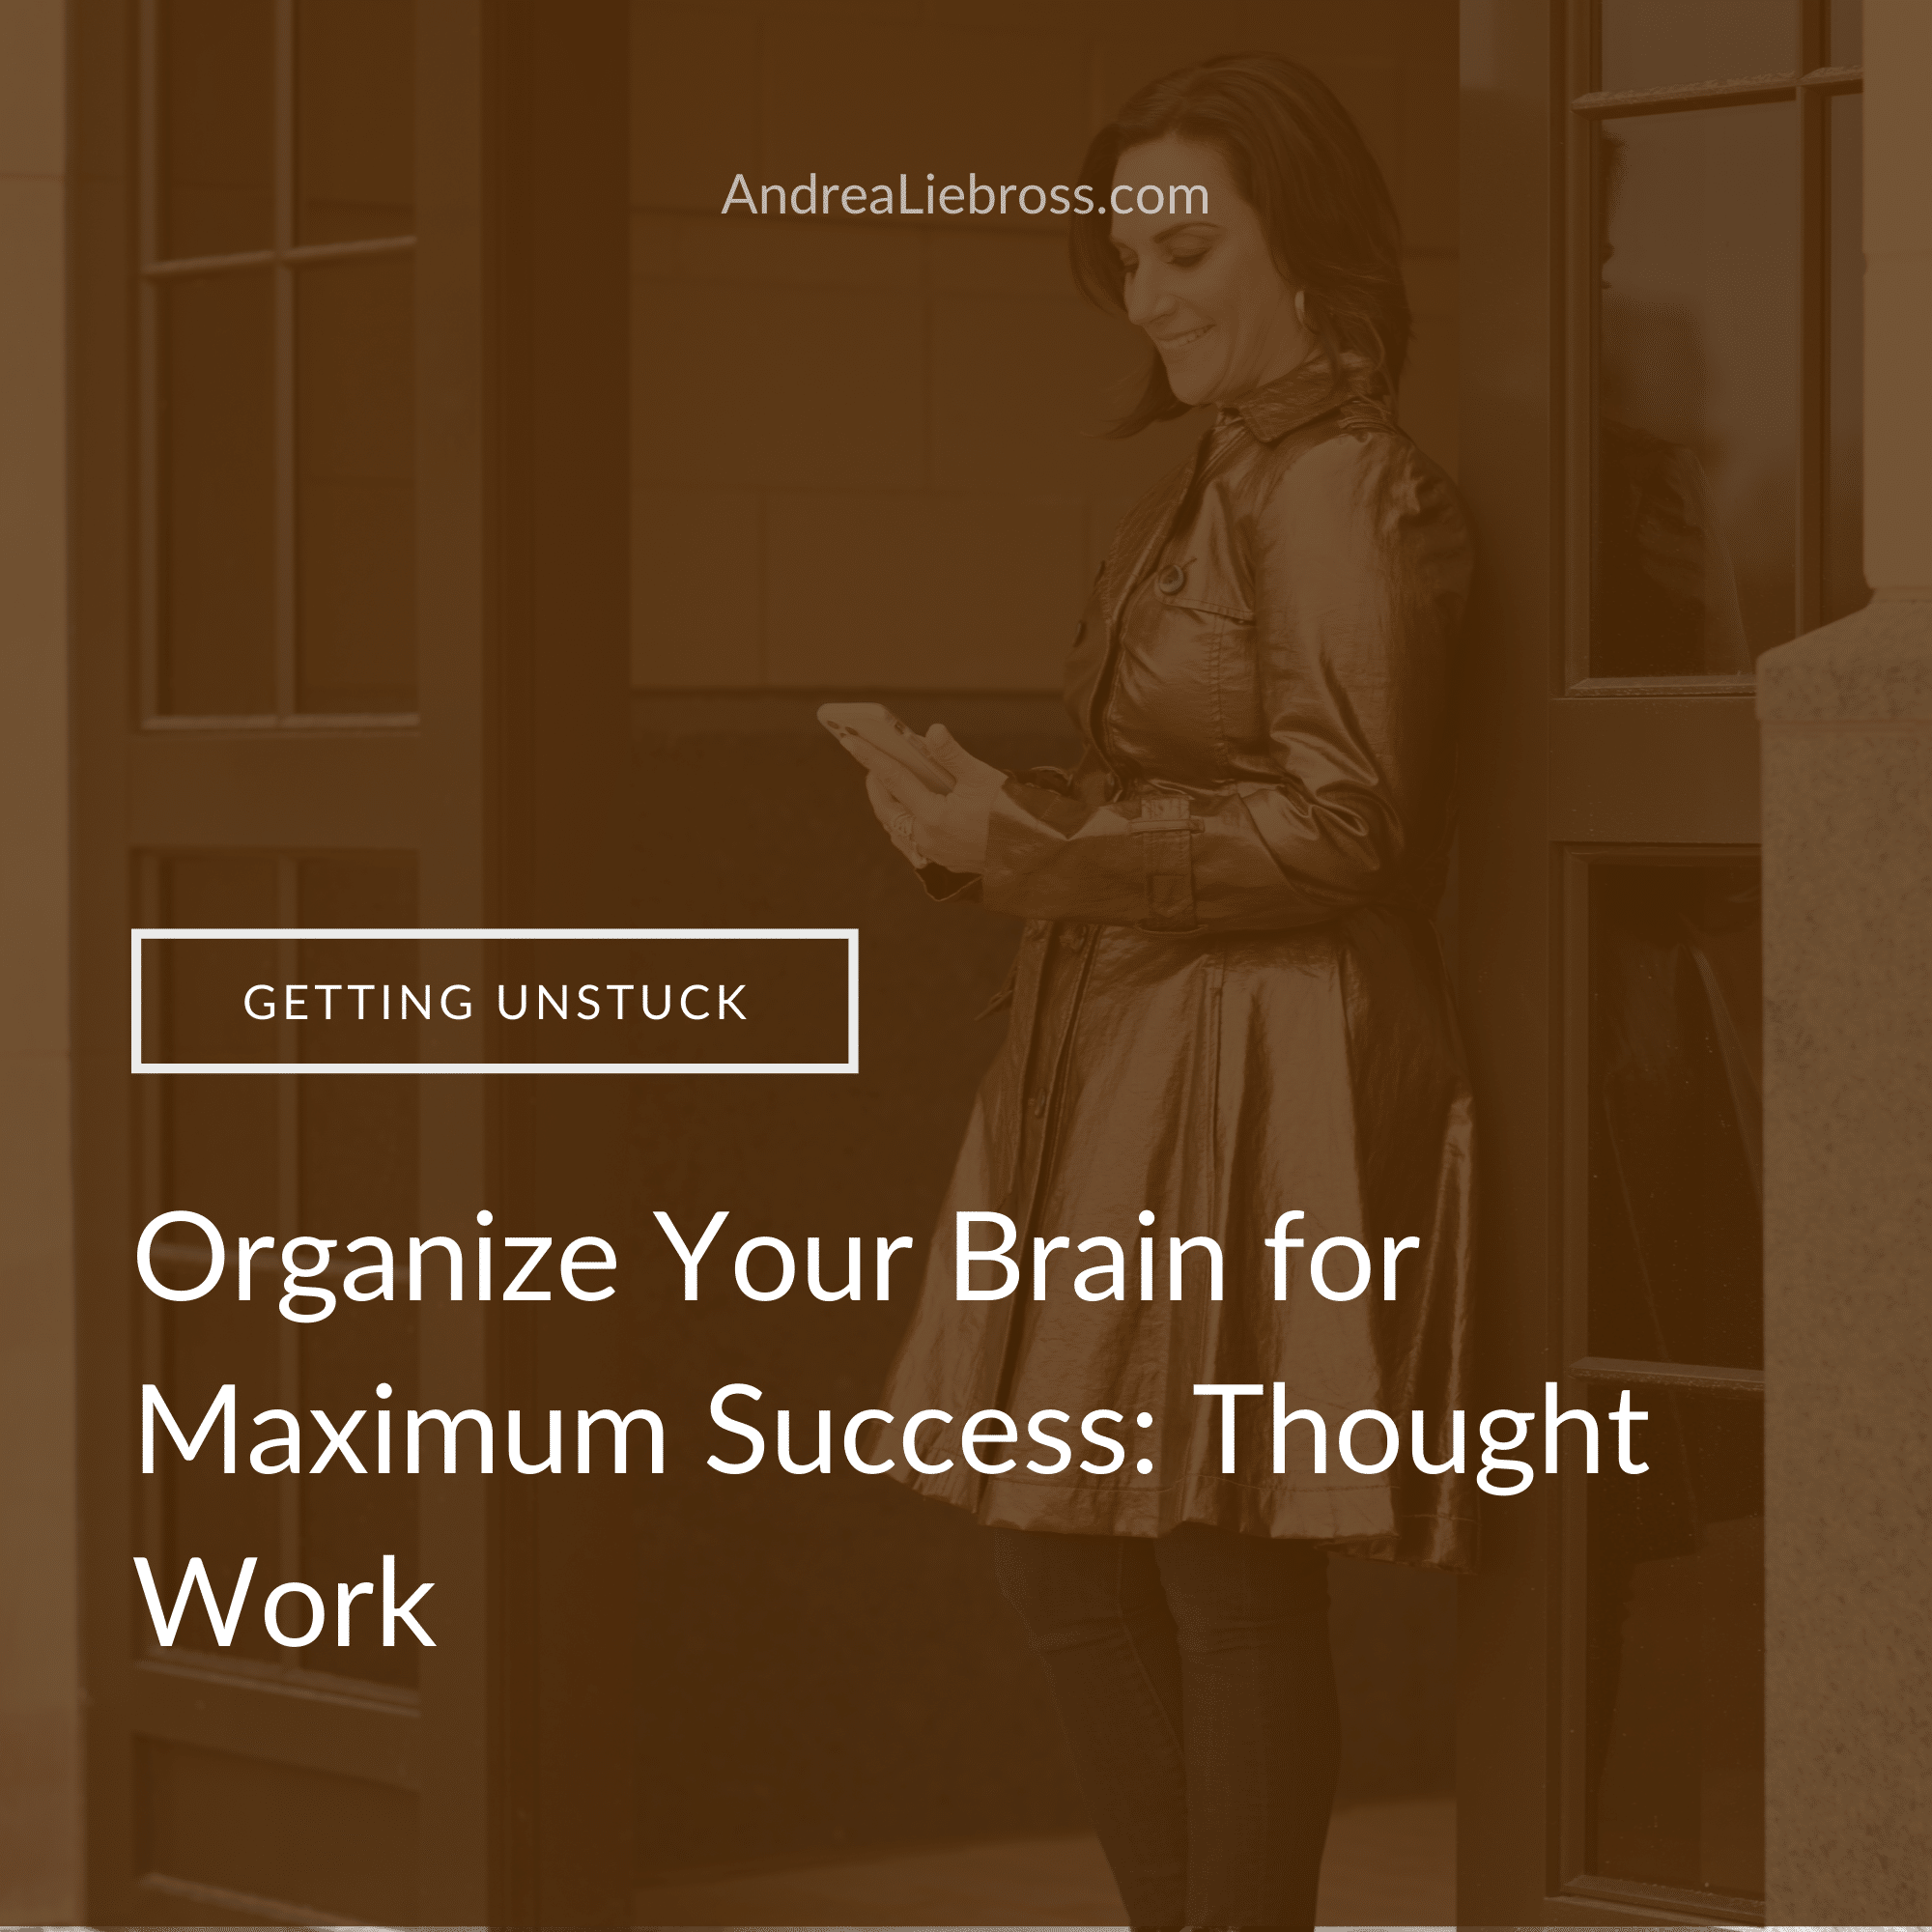 How to Organize Your Brain